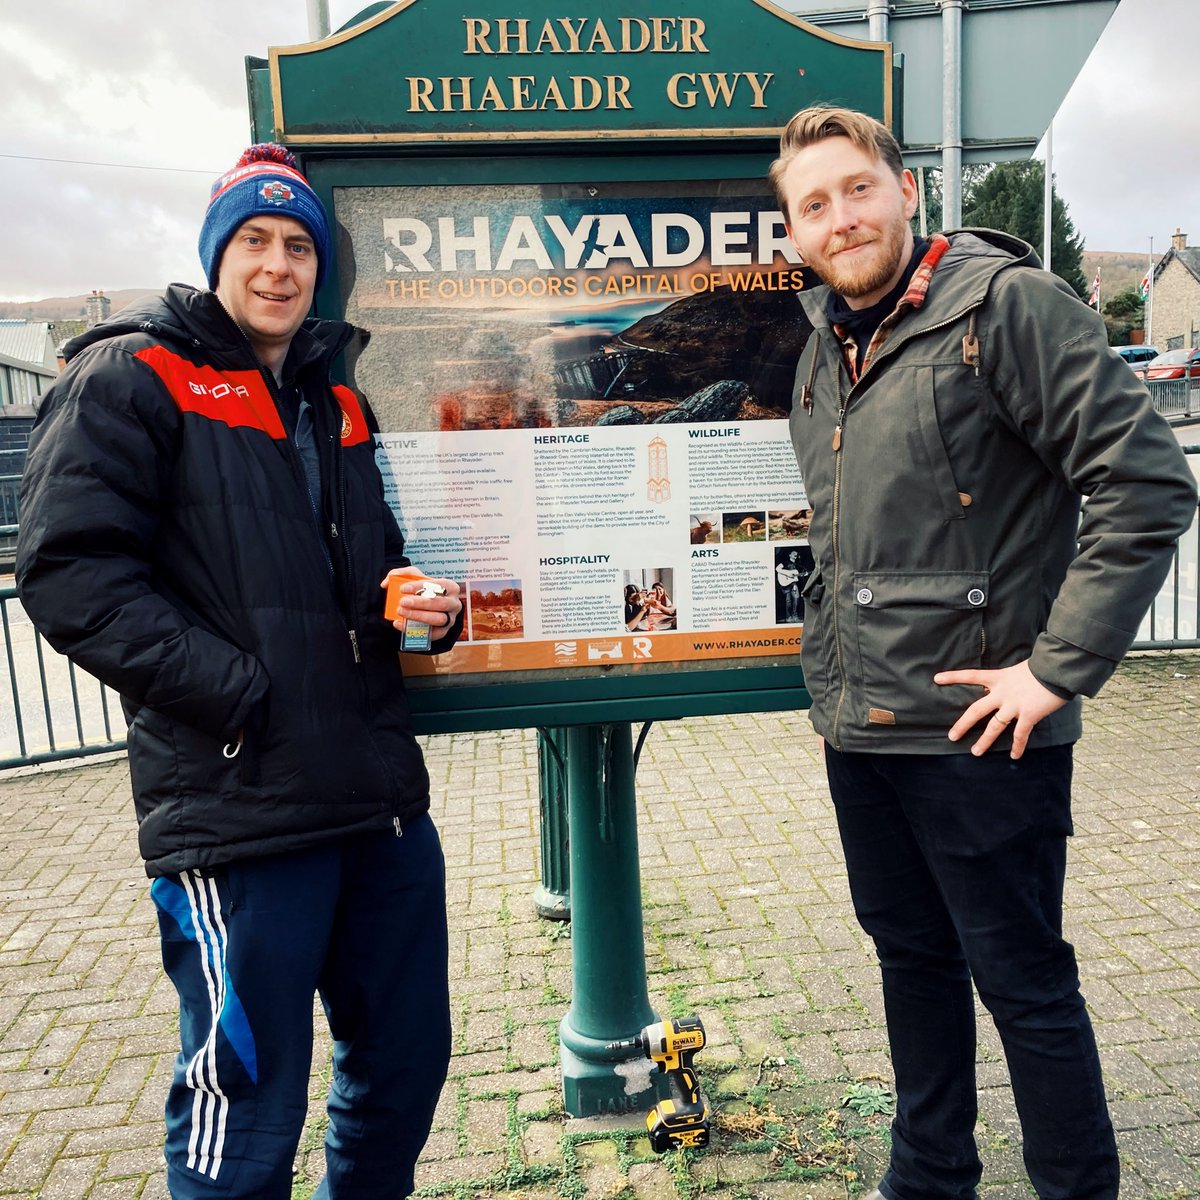 New signs and maps are being displayed around town to direct visitors to local attractions and businesses. Keep a look out for them. #Rhayader